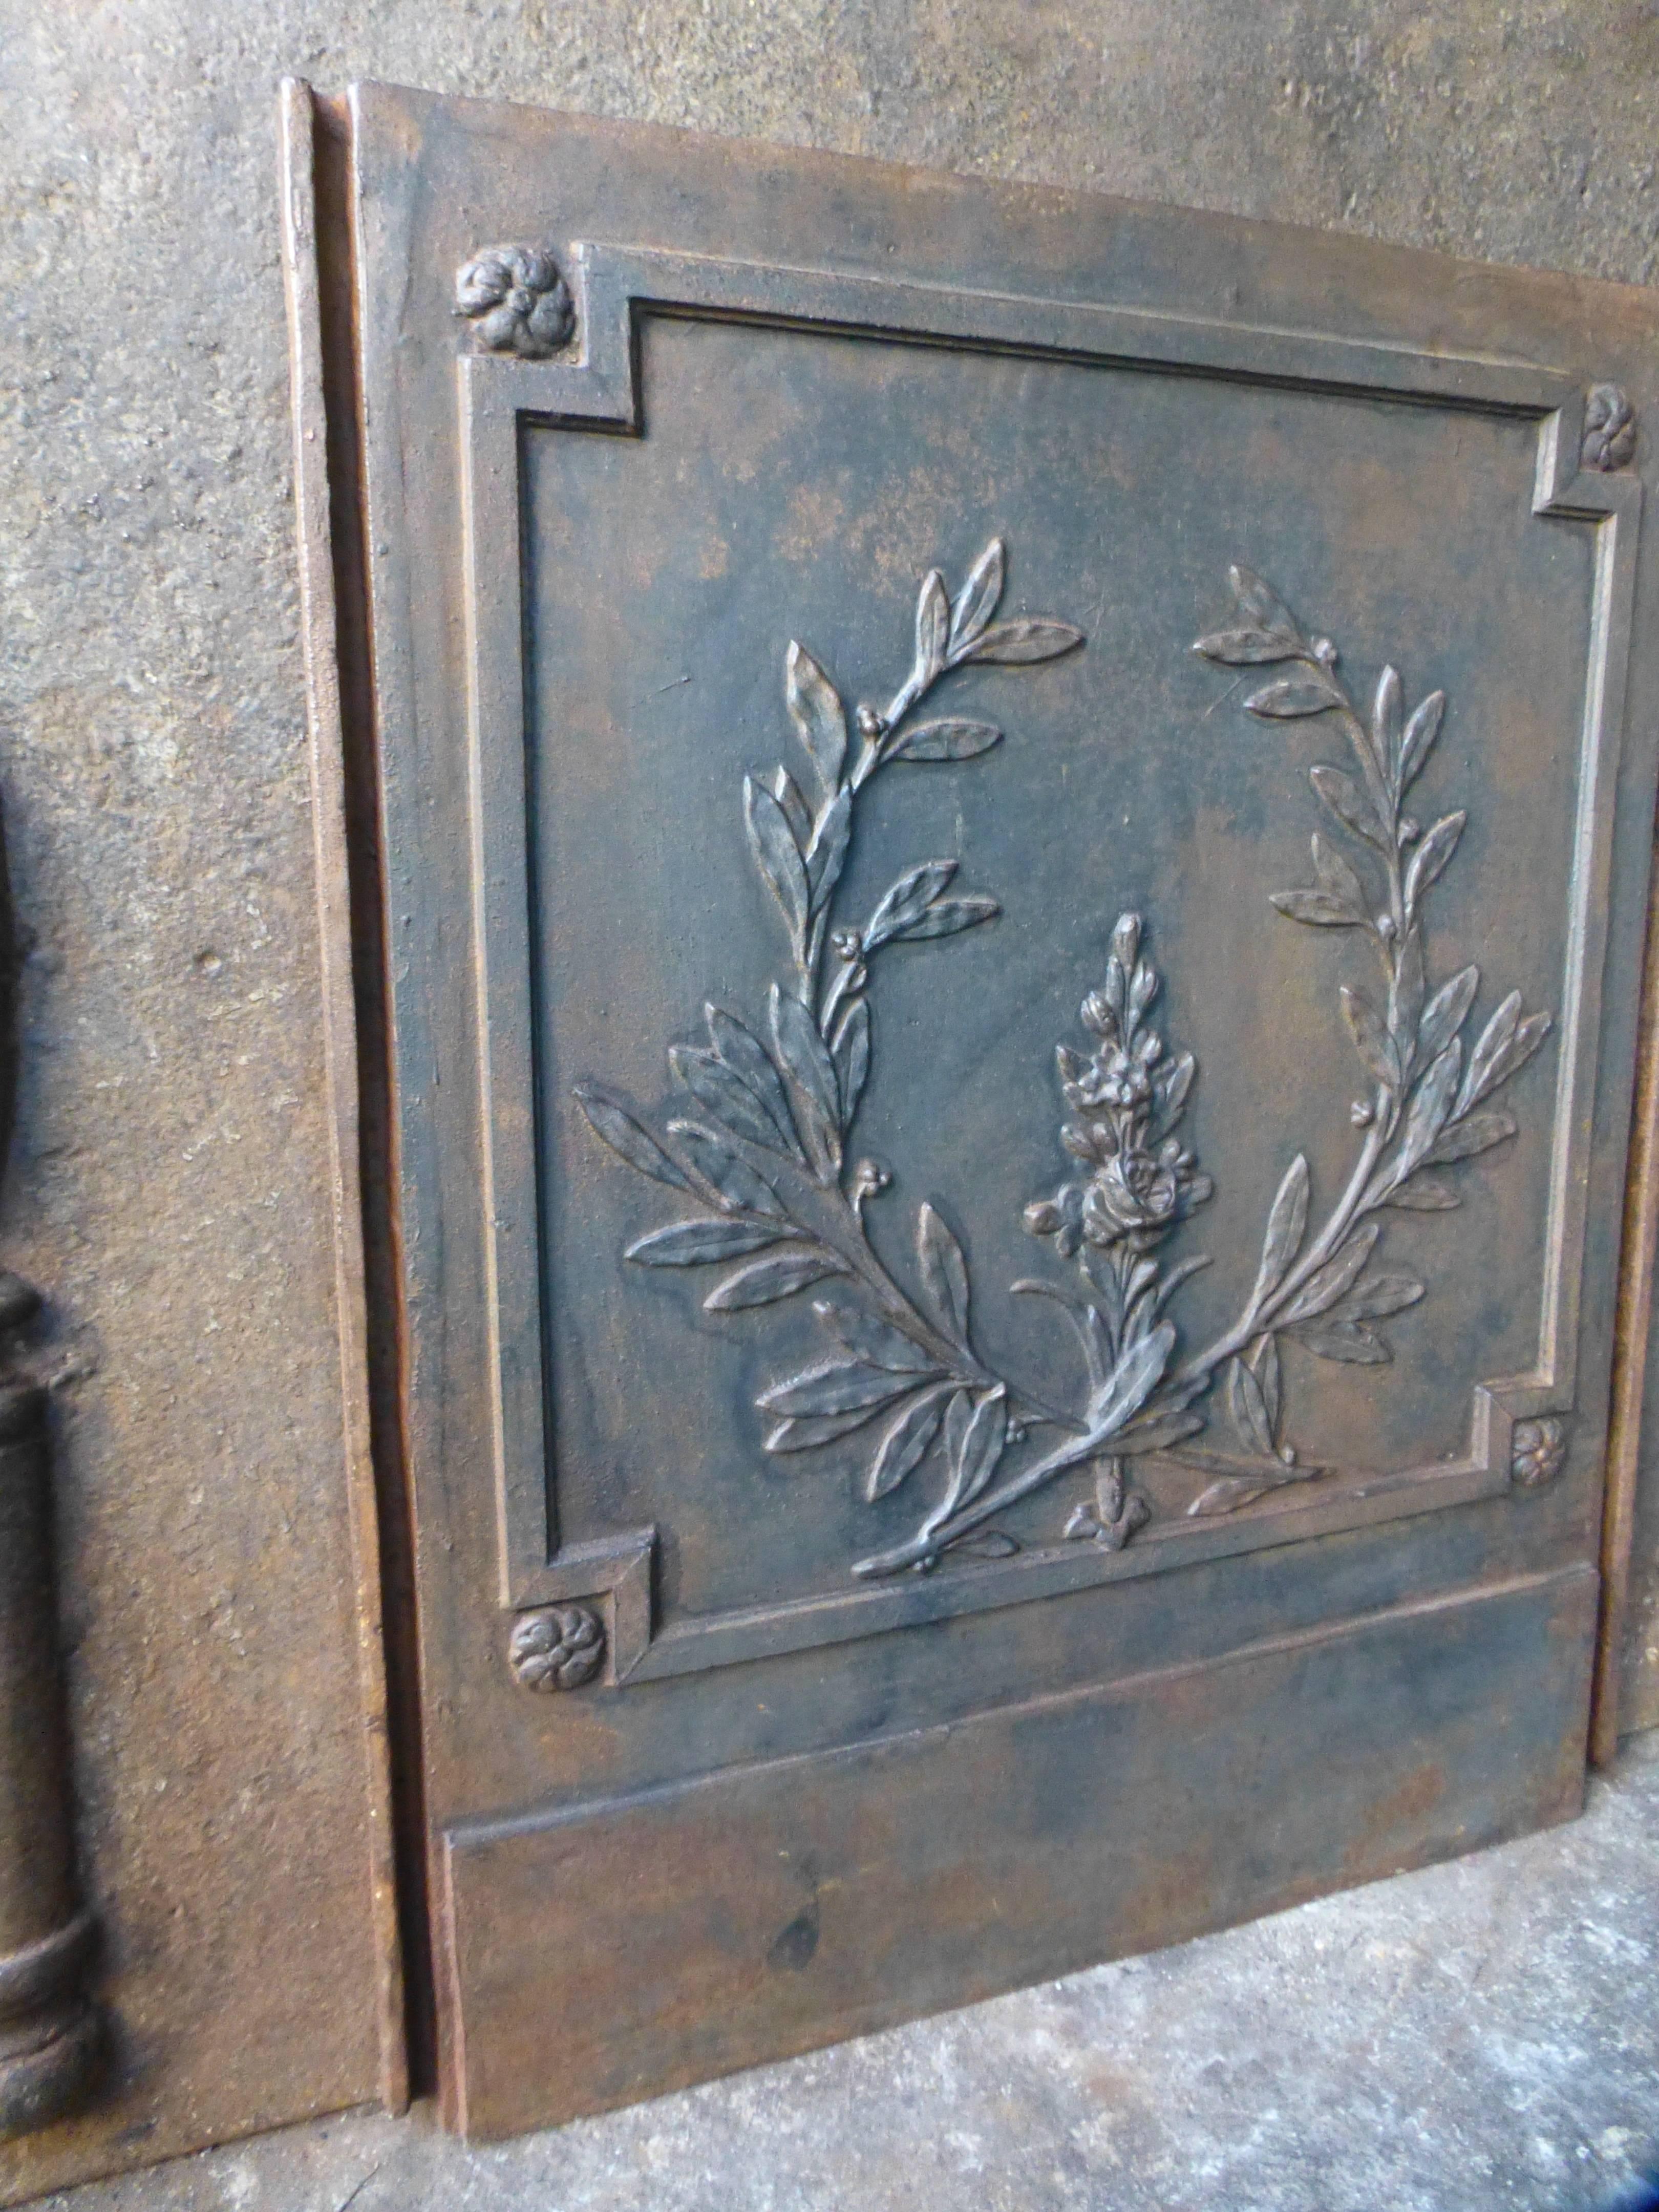 French fireback with olive branches (symbol for victory or peace) and a flower.